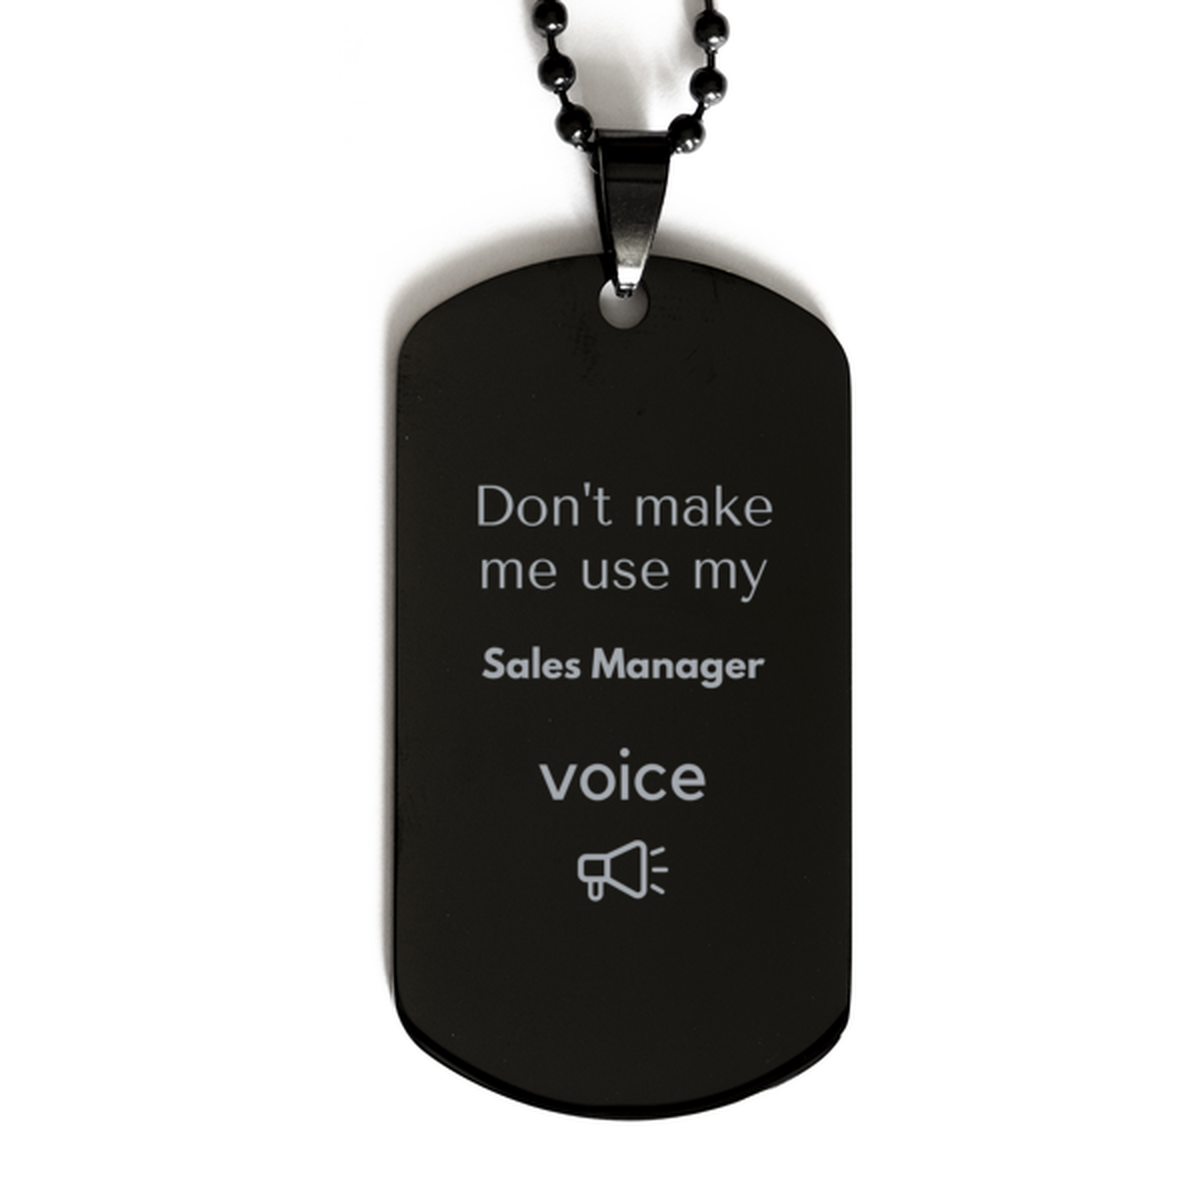 Don't make me use my Sales Manager voice, Sarcasm Sales Manager Gifts, Christmas Sales Manager Black Dog Tag Birthday Unique Gifts For Sales Manager Coworkers, Men, Women, Colleague, Friends